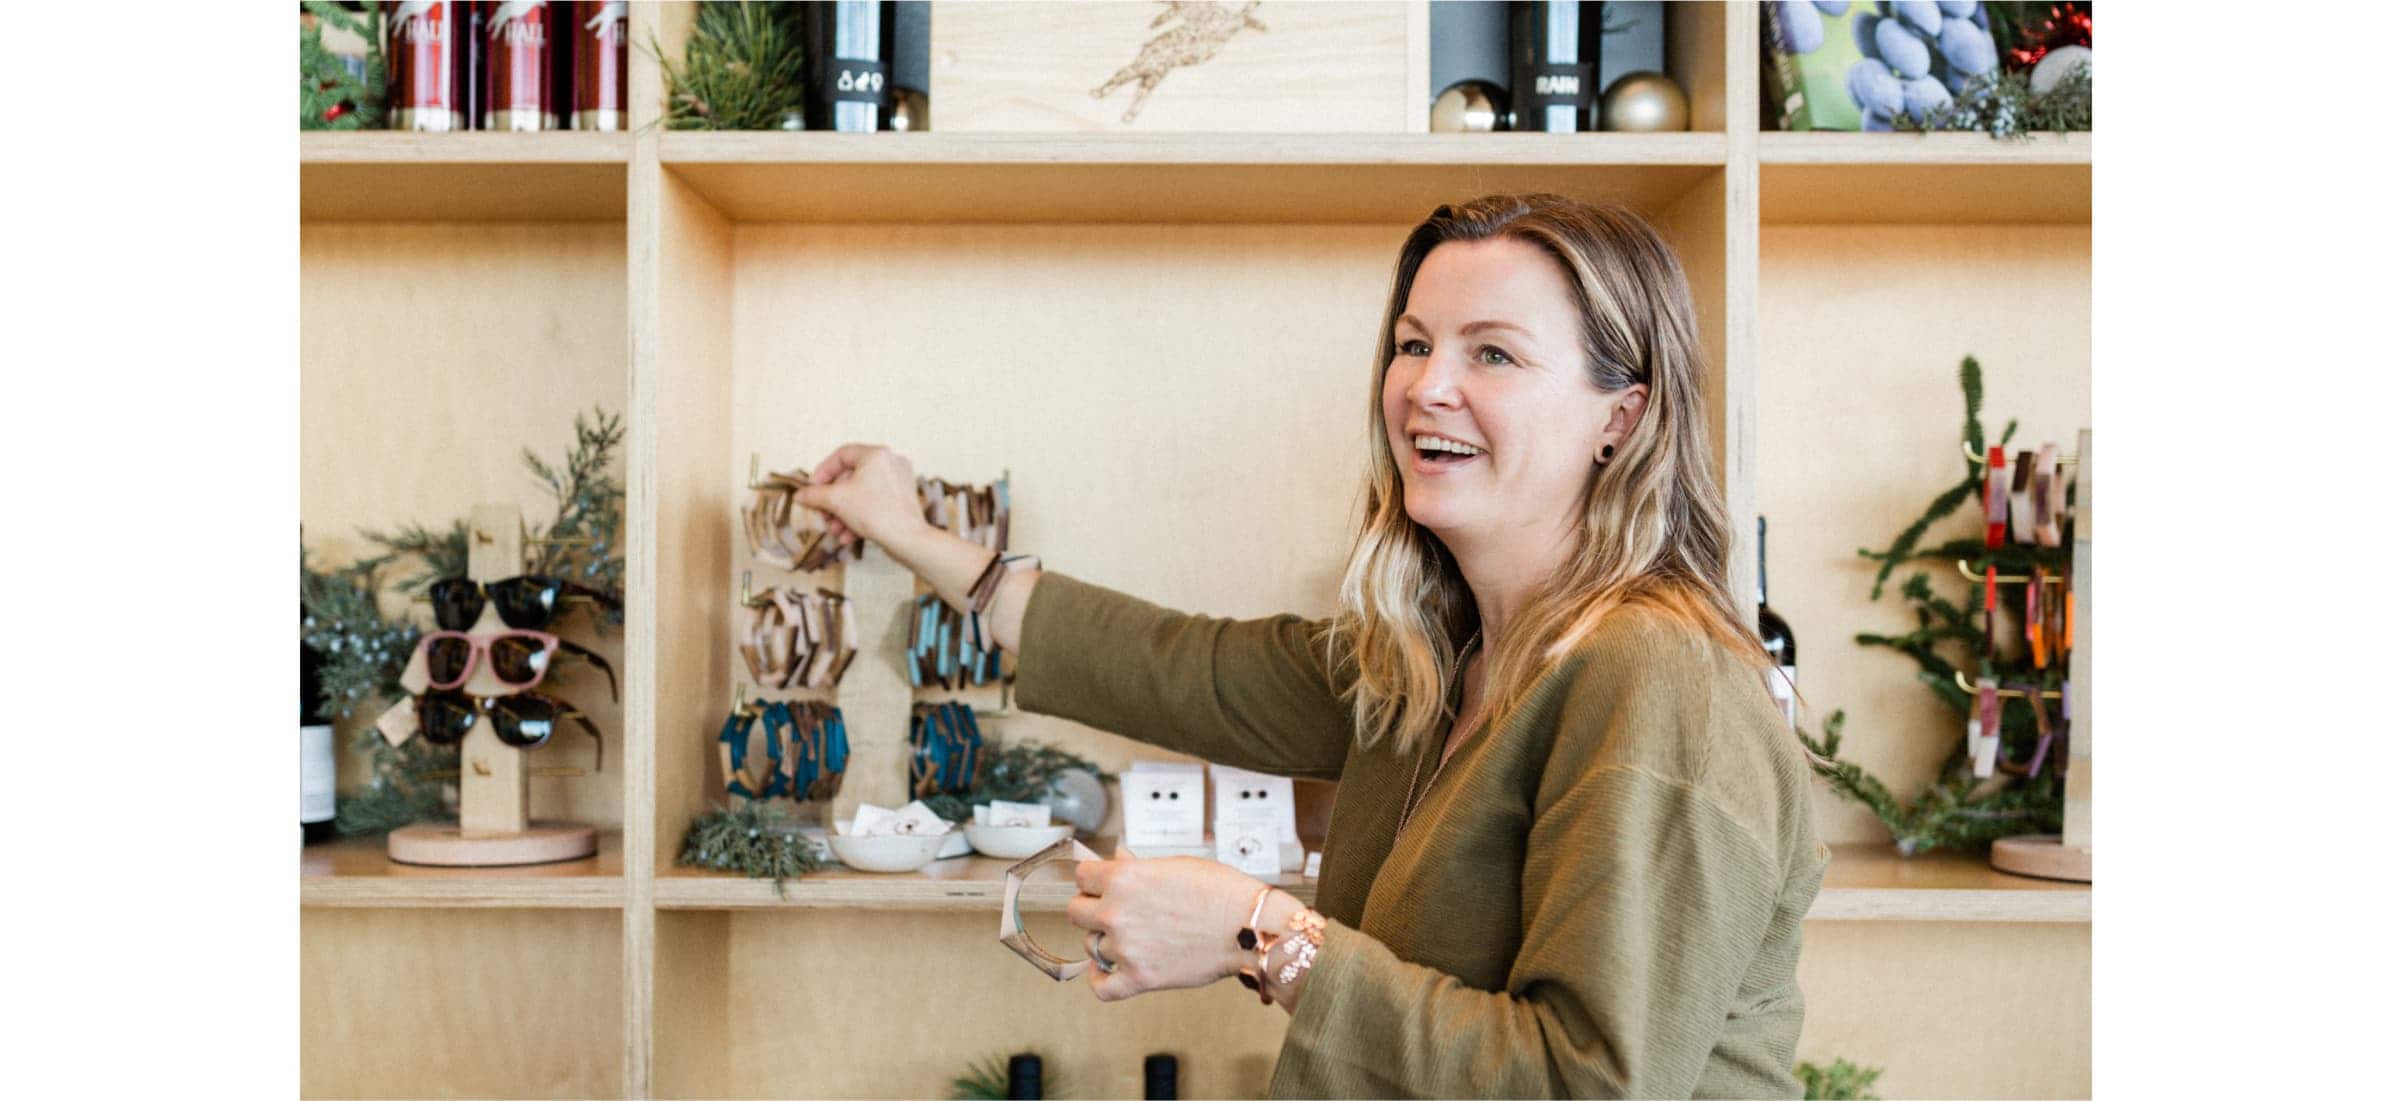 Nicole Hughes arranging bracelets on a stand in her store, Olive and Poppy.